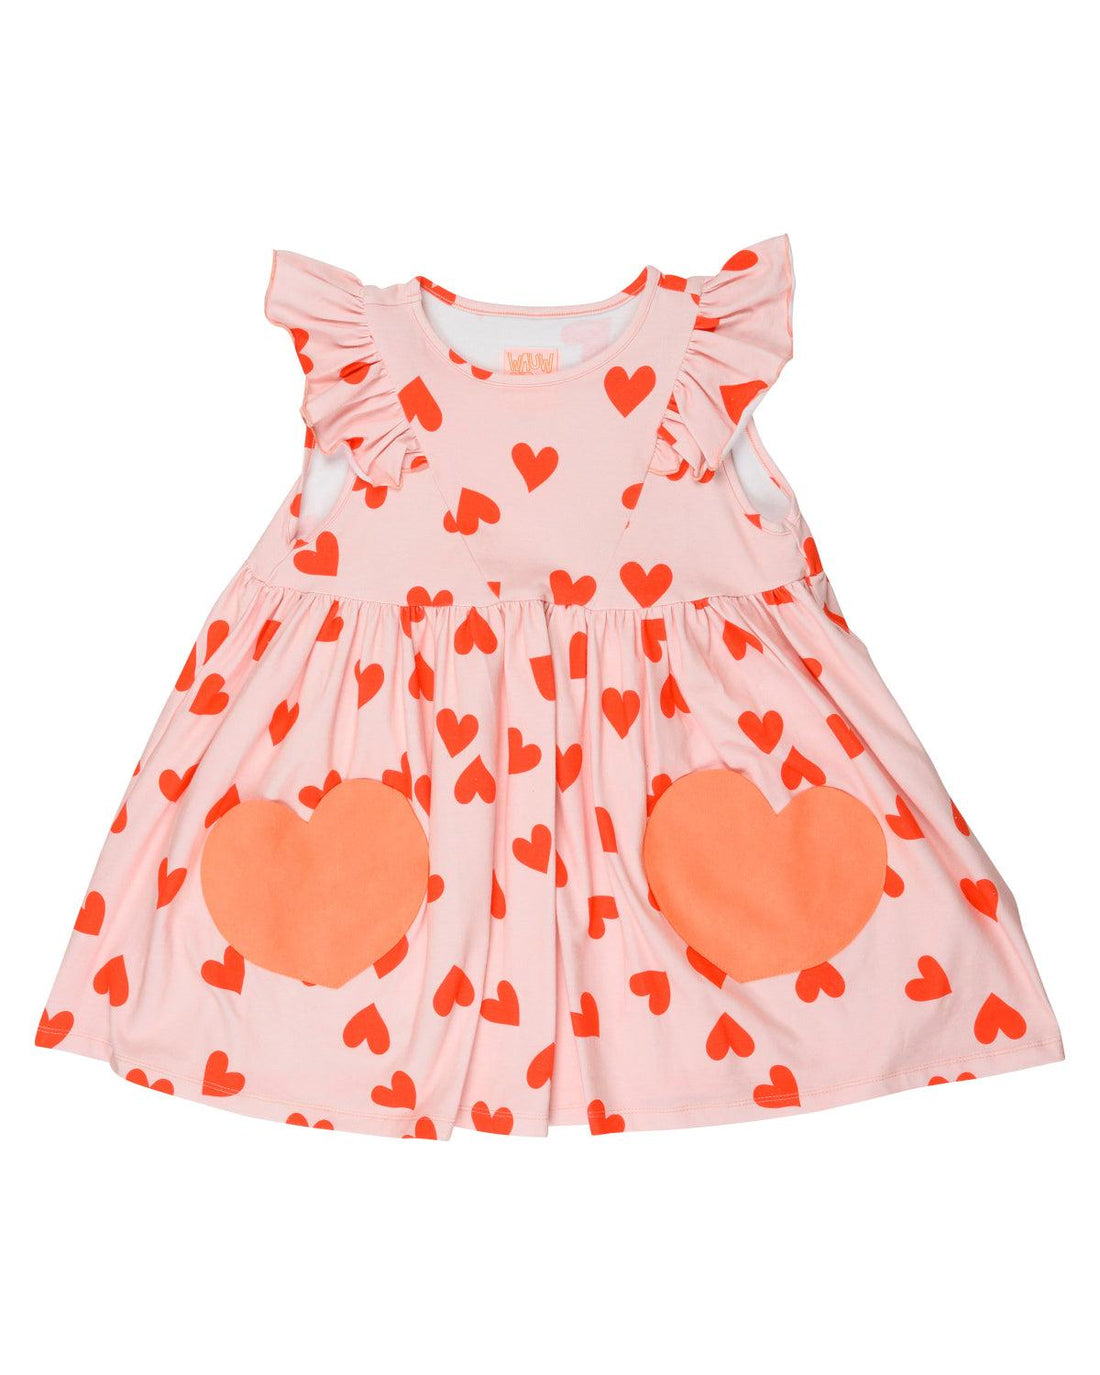  Clementine Lovely Dress - My Little Thieves